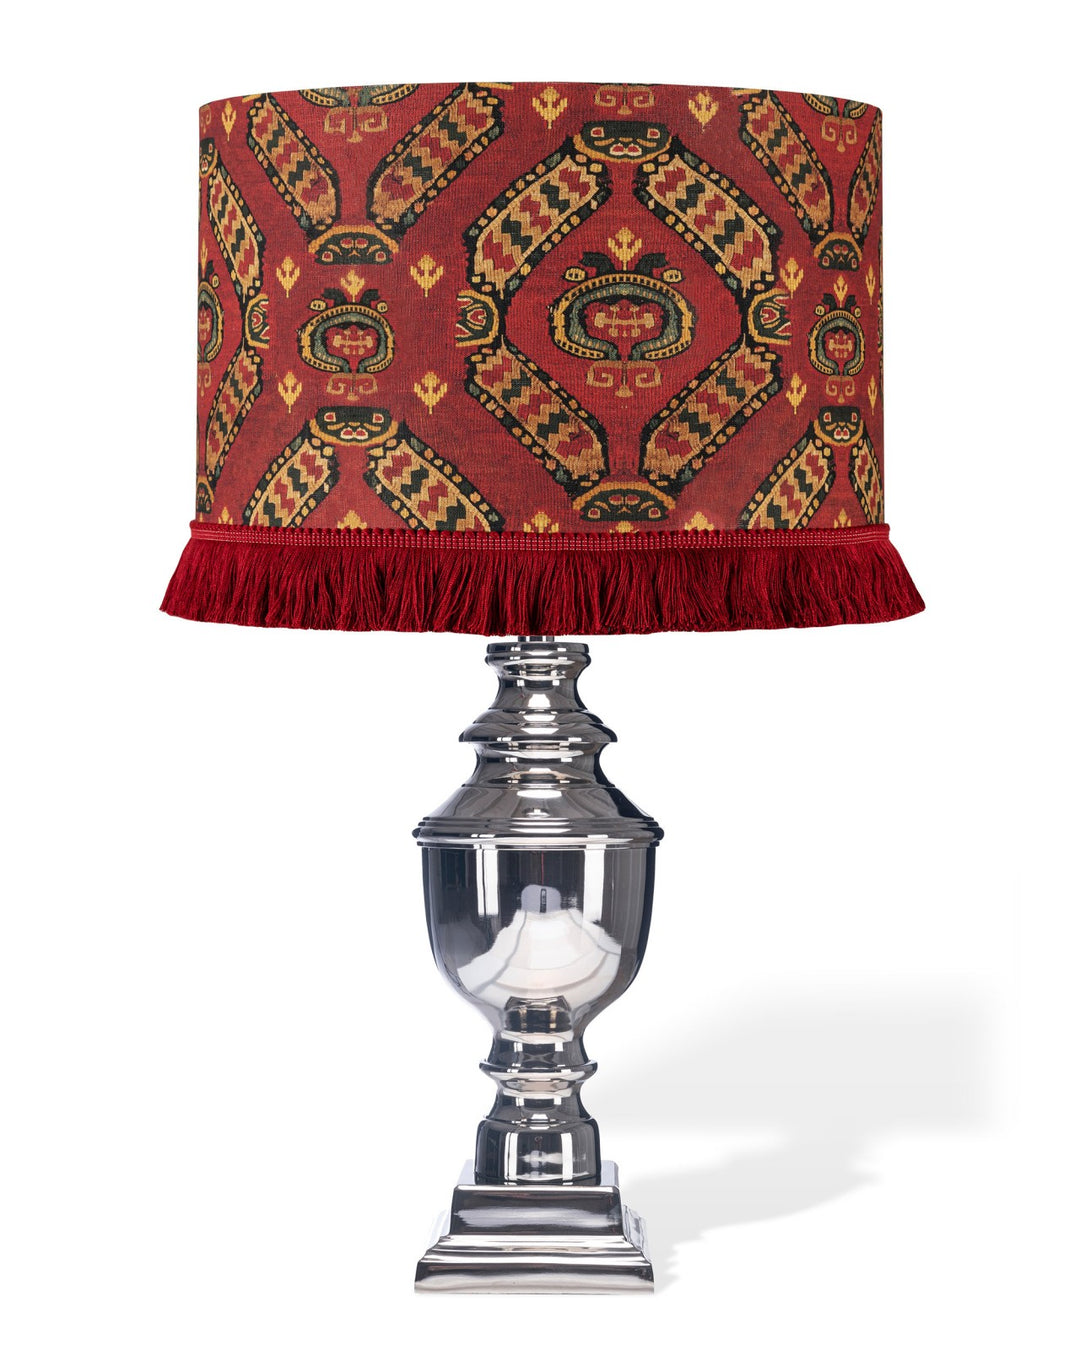 Mind-the-gap-tyrol-collection-roverto-red-linen-friged-detail-drum-standard-lamp-shade-apres-ski-alpine-chalet-cabin-